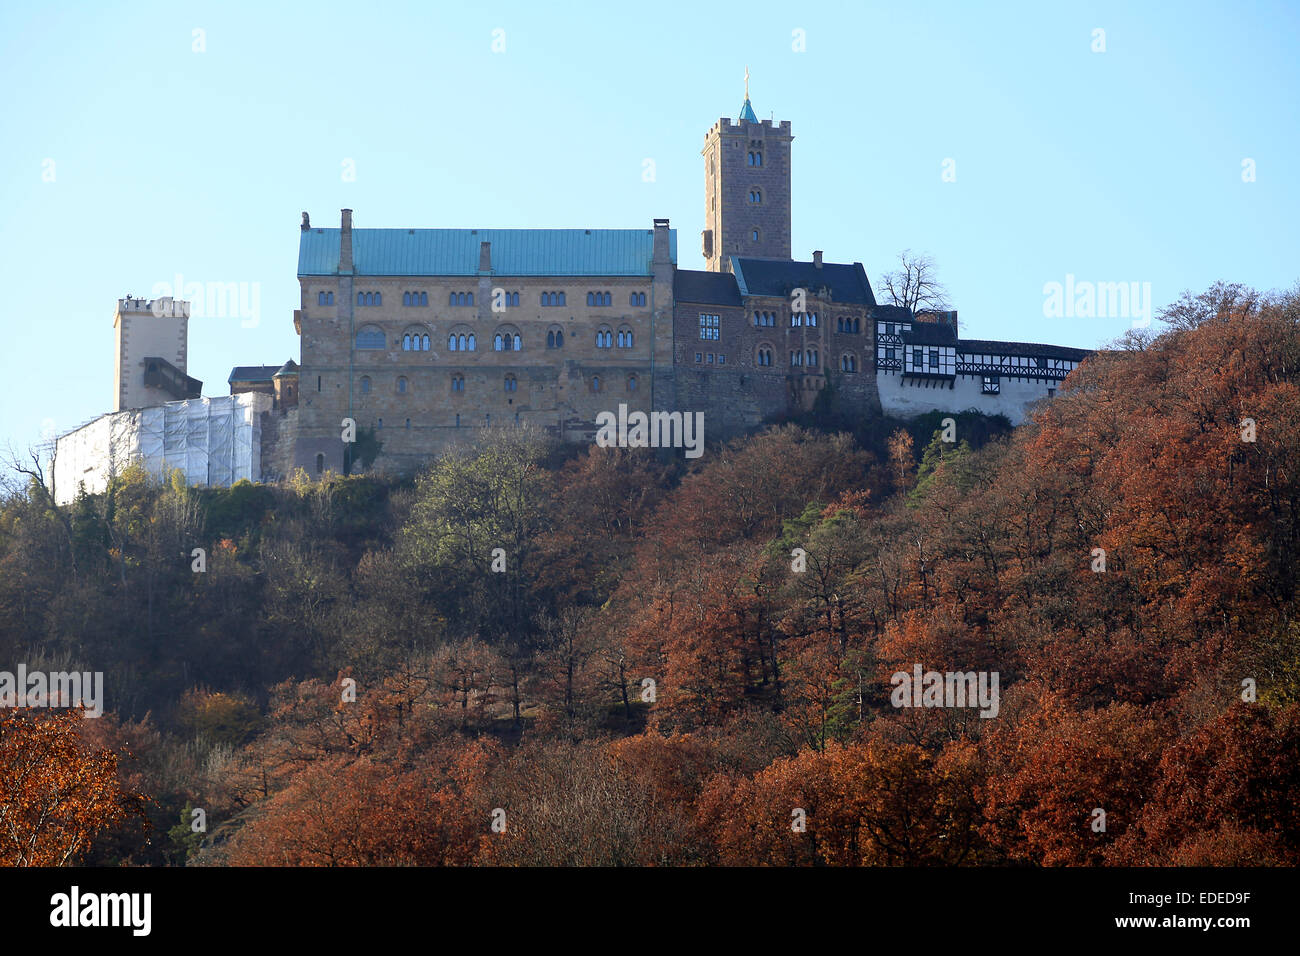 The Wartburg is a castle near Eisenach. It was founded in 1067 by Louis the Springer and belongs since 1999 as a World Heritage Site. Photo: Klaus Nowottnick Date: November 06, 2011 Stock Photo